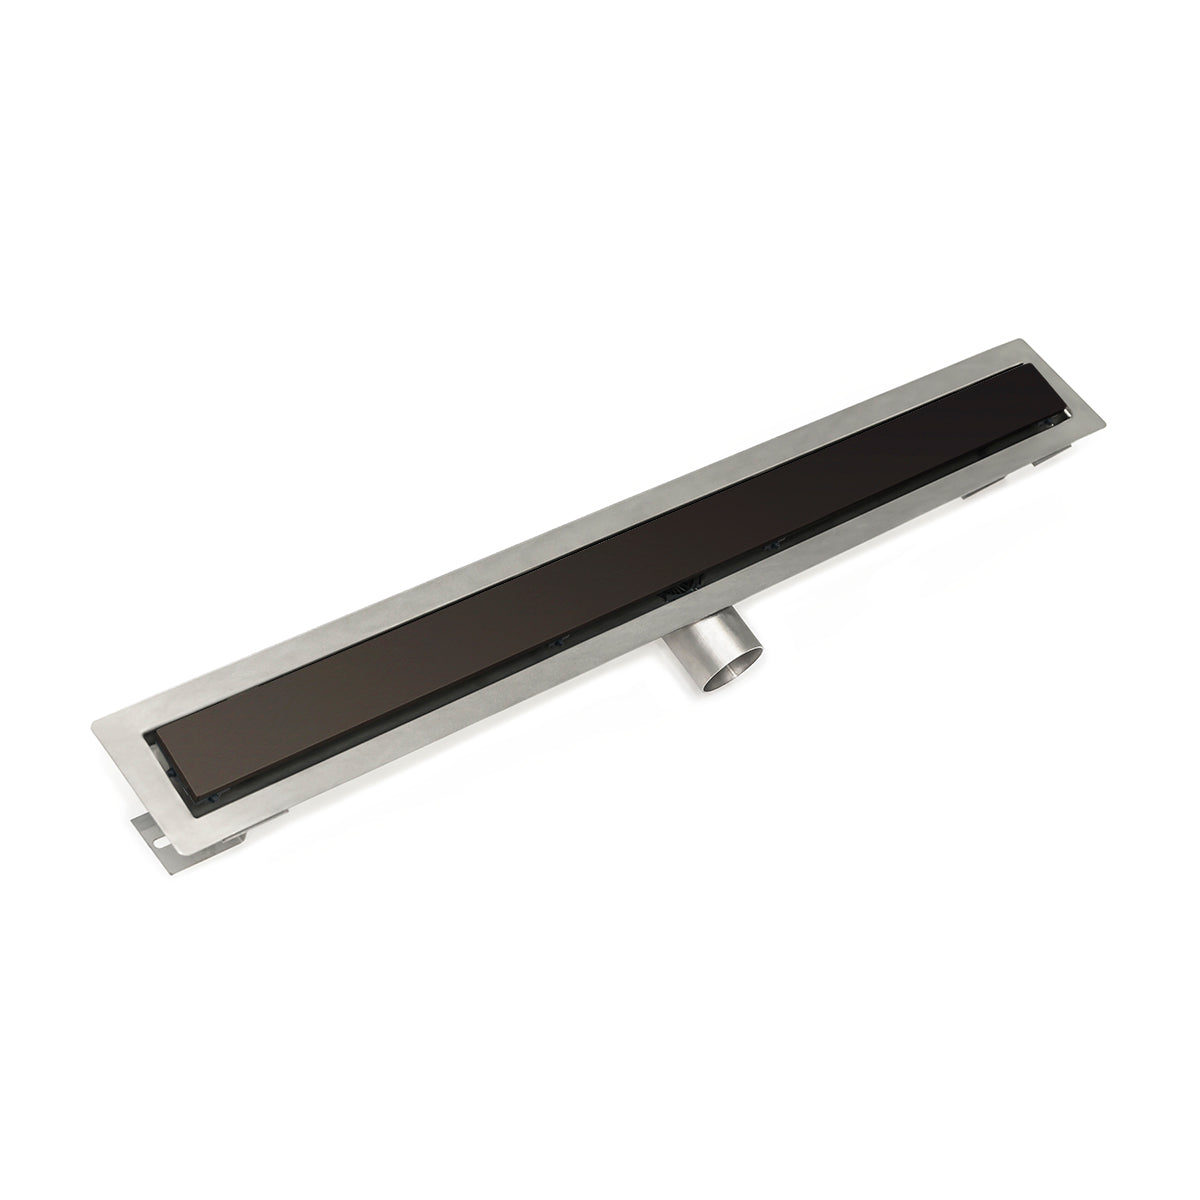 Infinity Drain 24" FT Series Side Outlet Linear Drain Kit with 2 1/2" Solid Grate